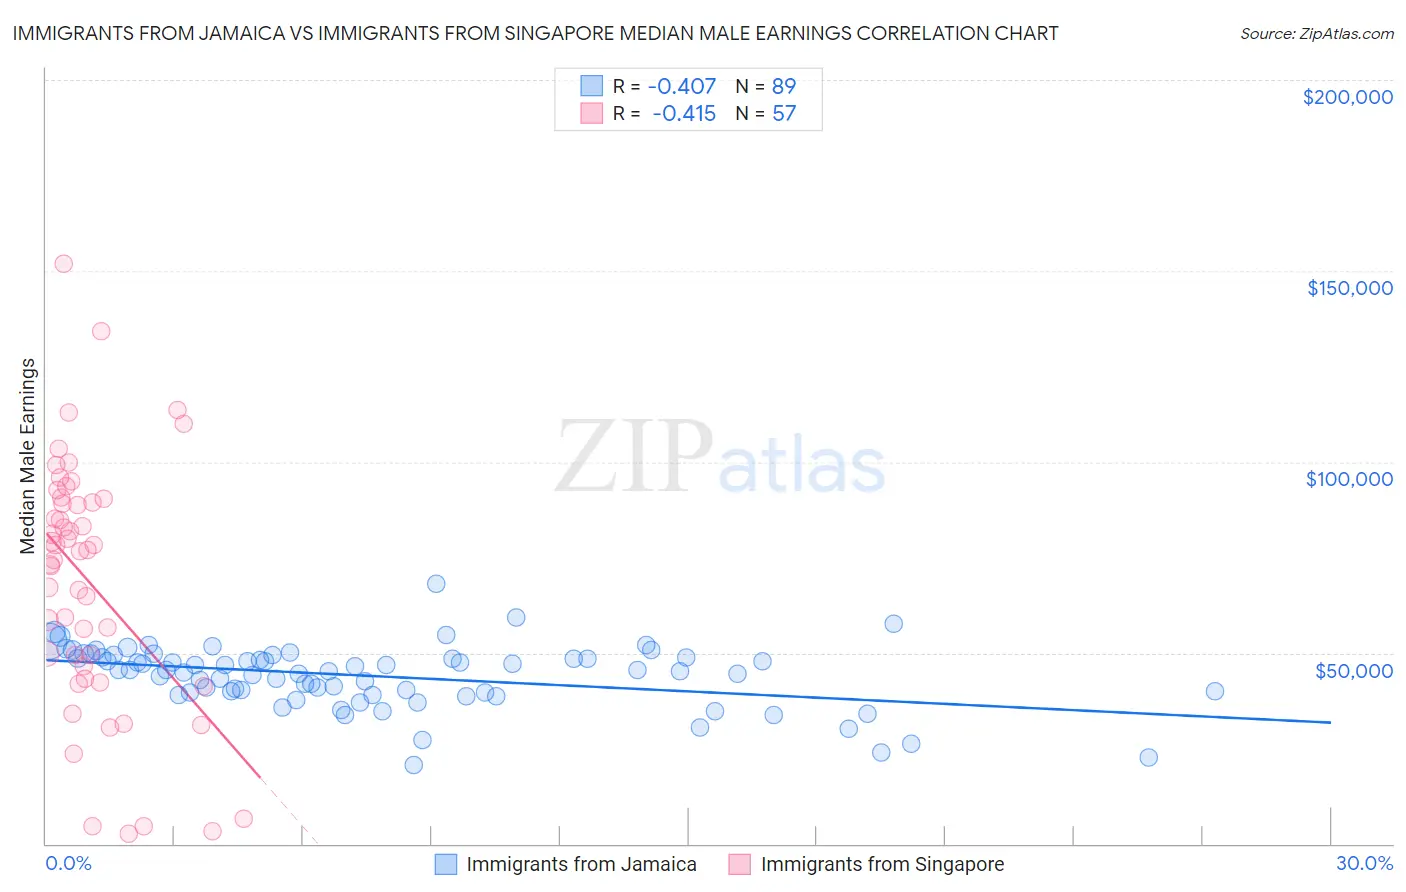 Immigrants from Jamaica vs Immigrants from Singapore Median Male Earnings